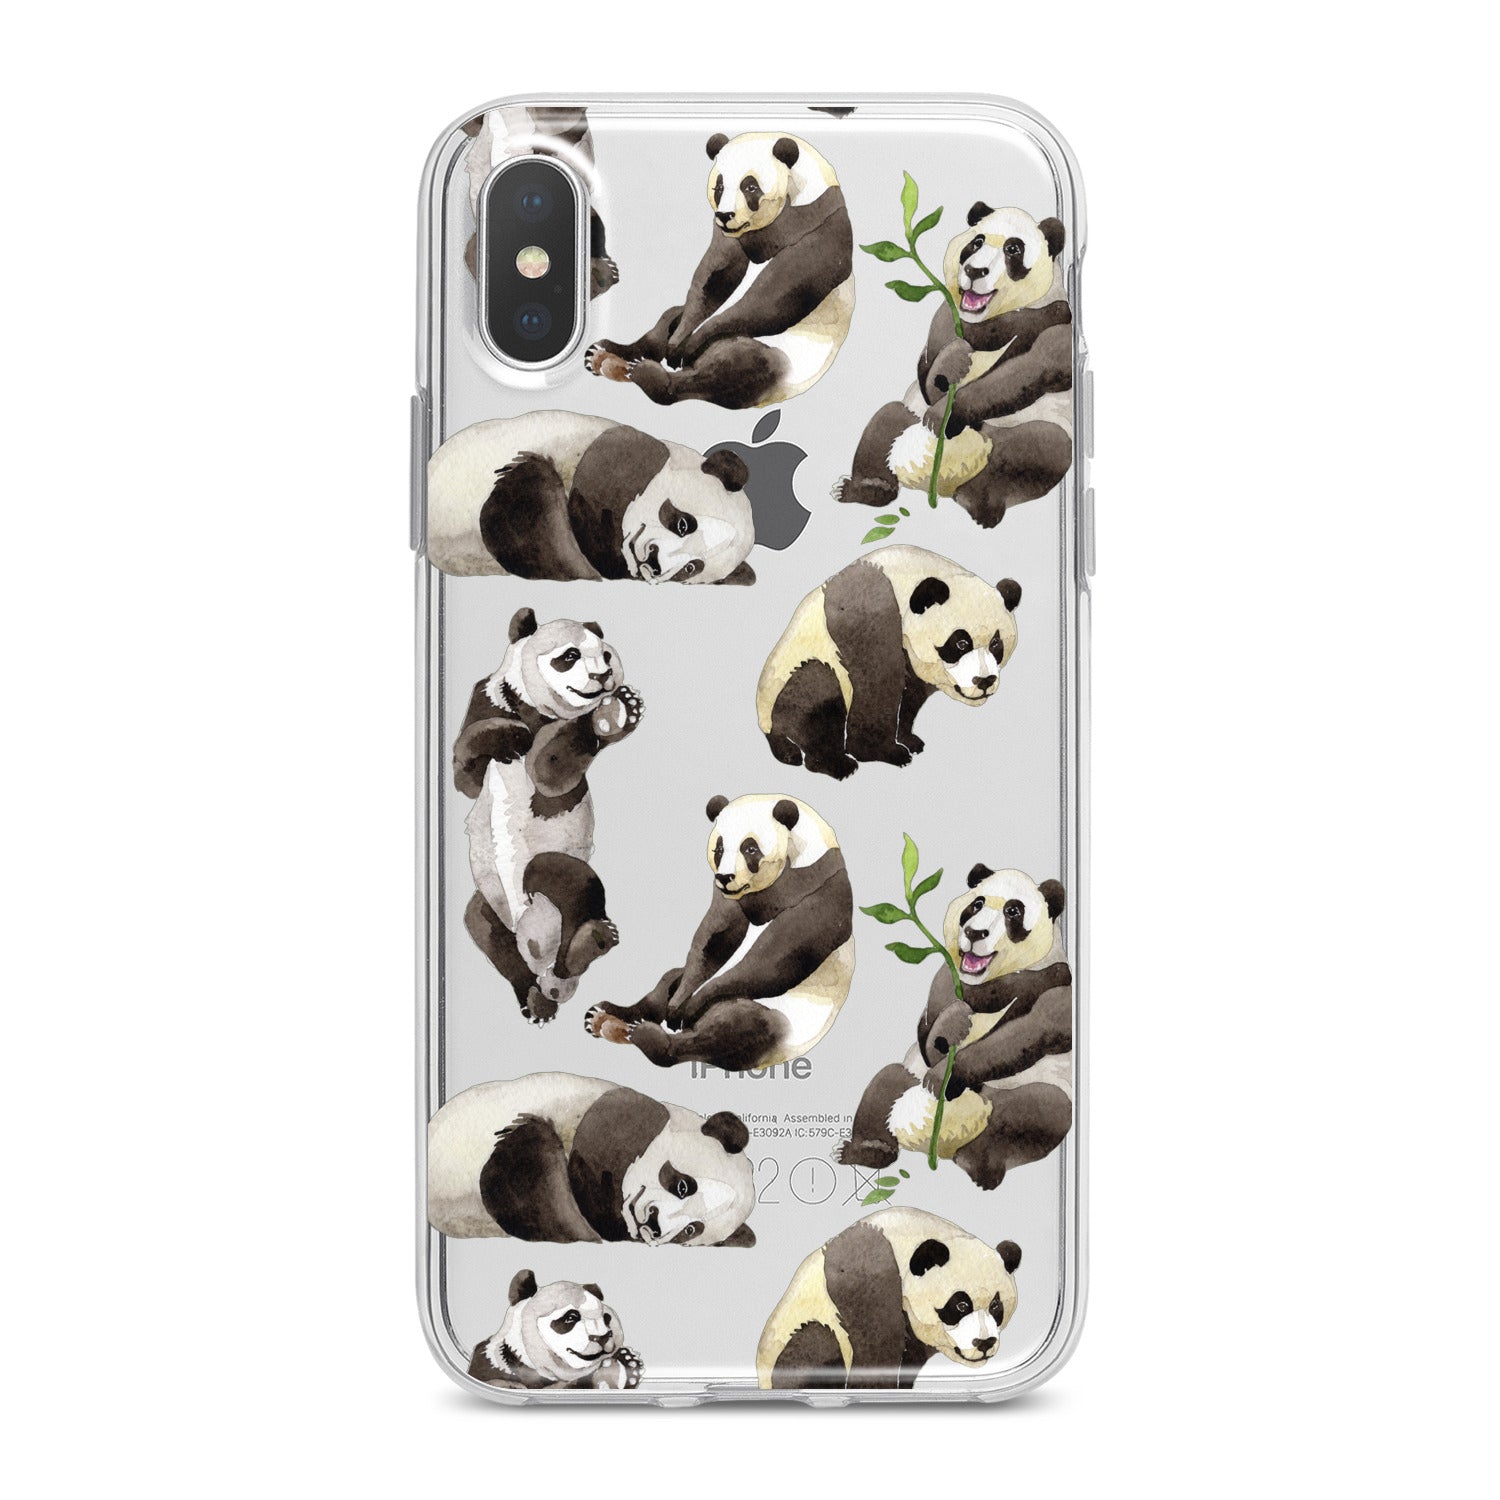 Lex Altern Cute Panda Phone Case for your iPhone & Android phone.